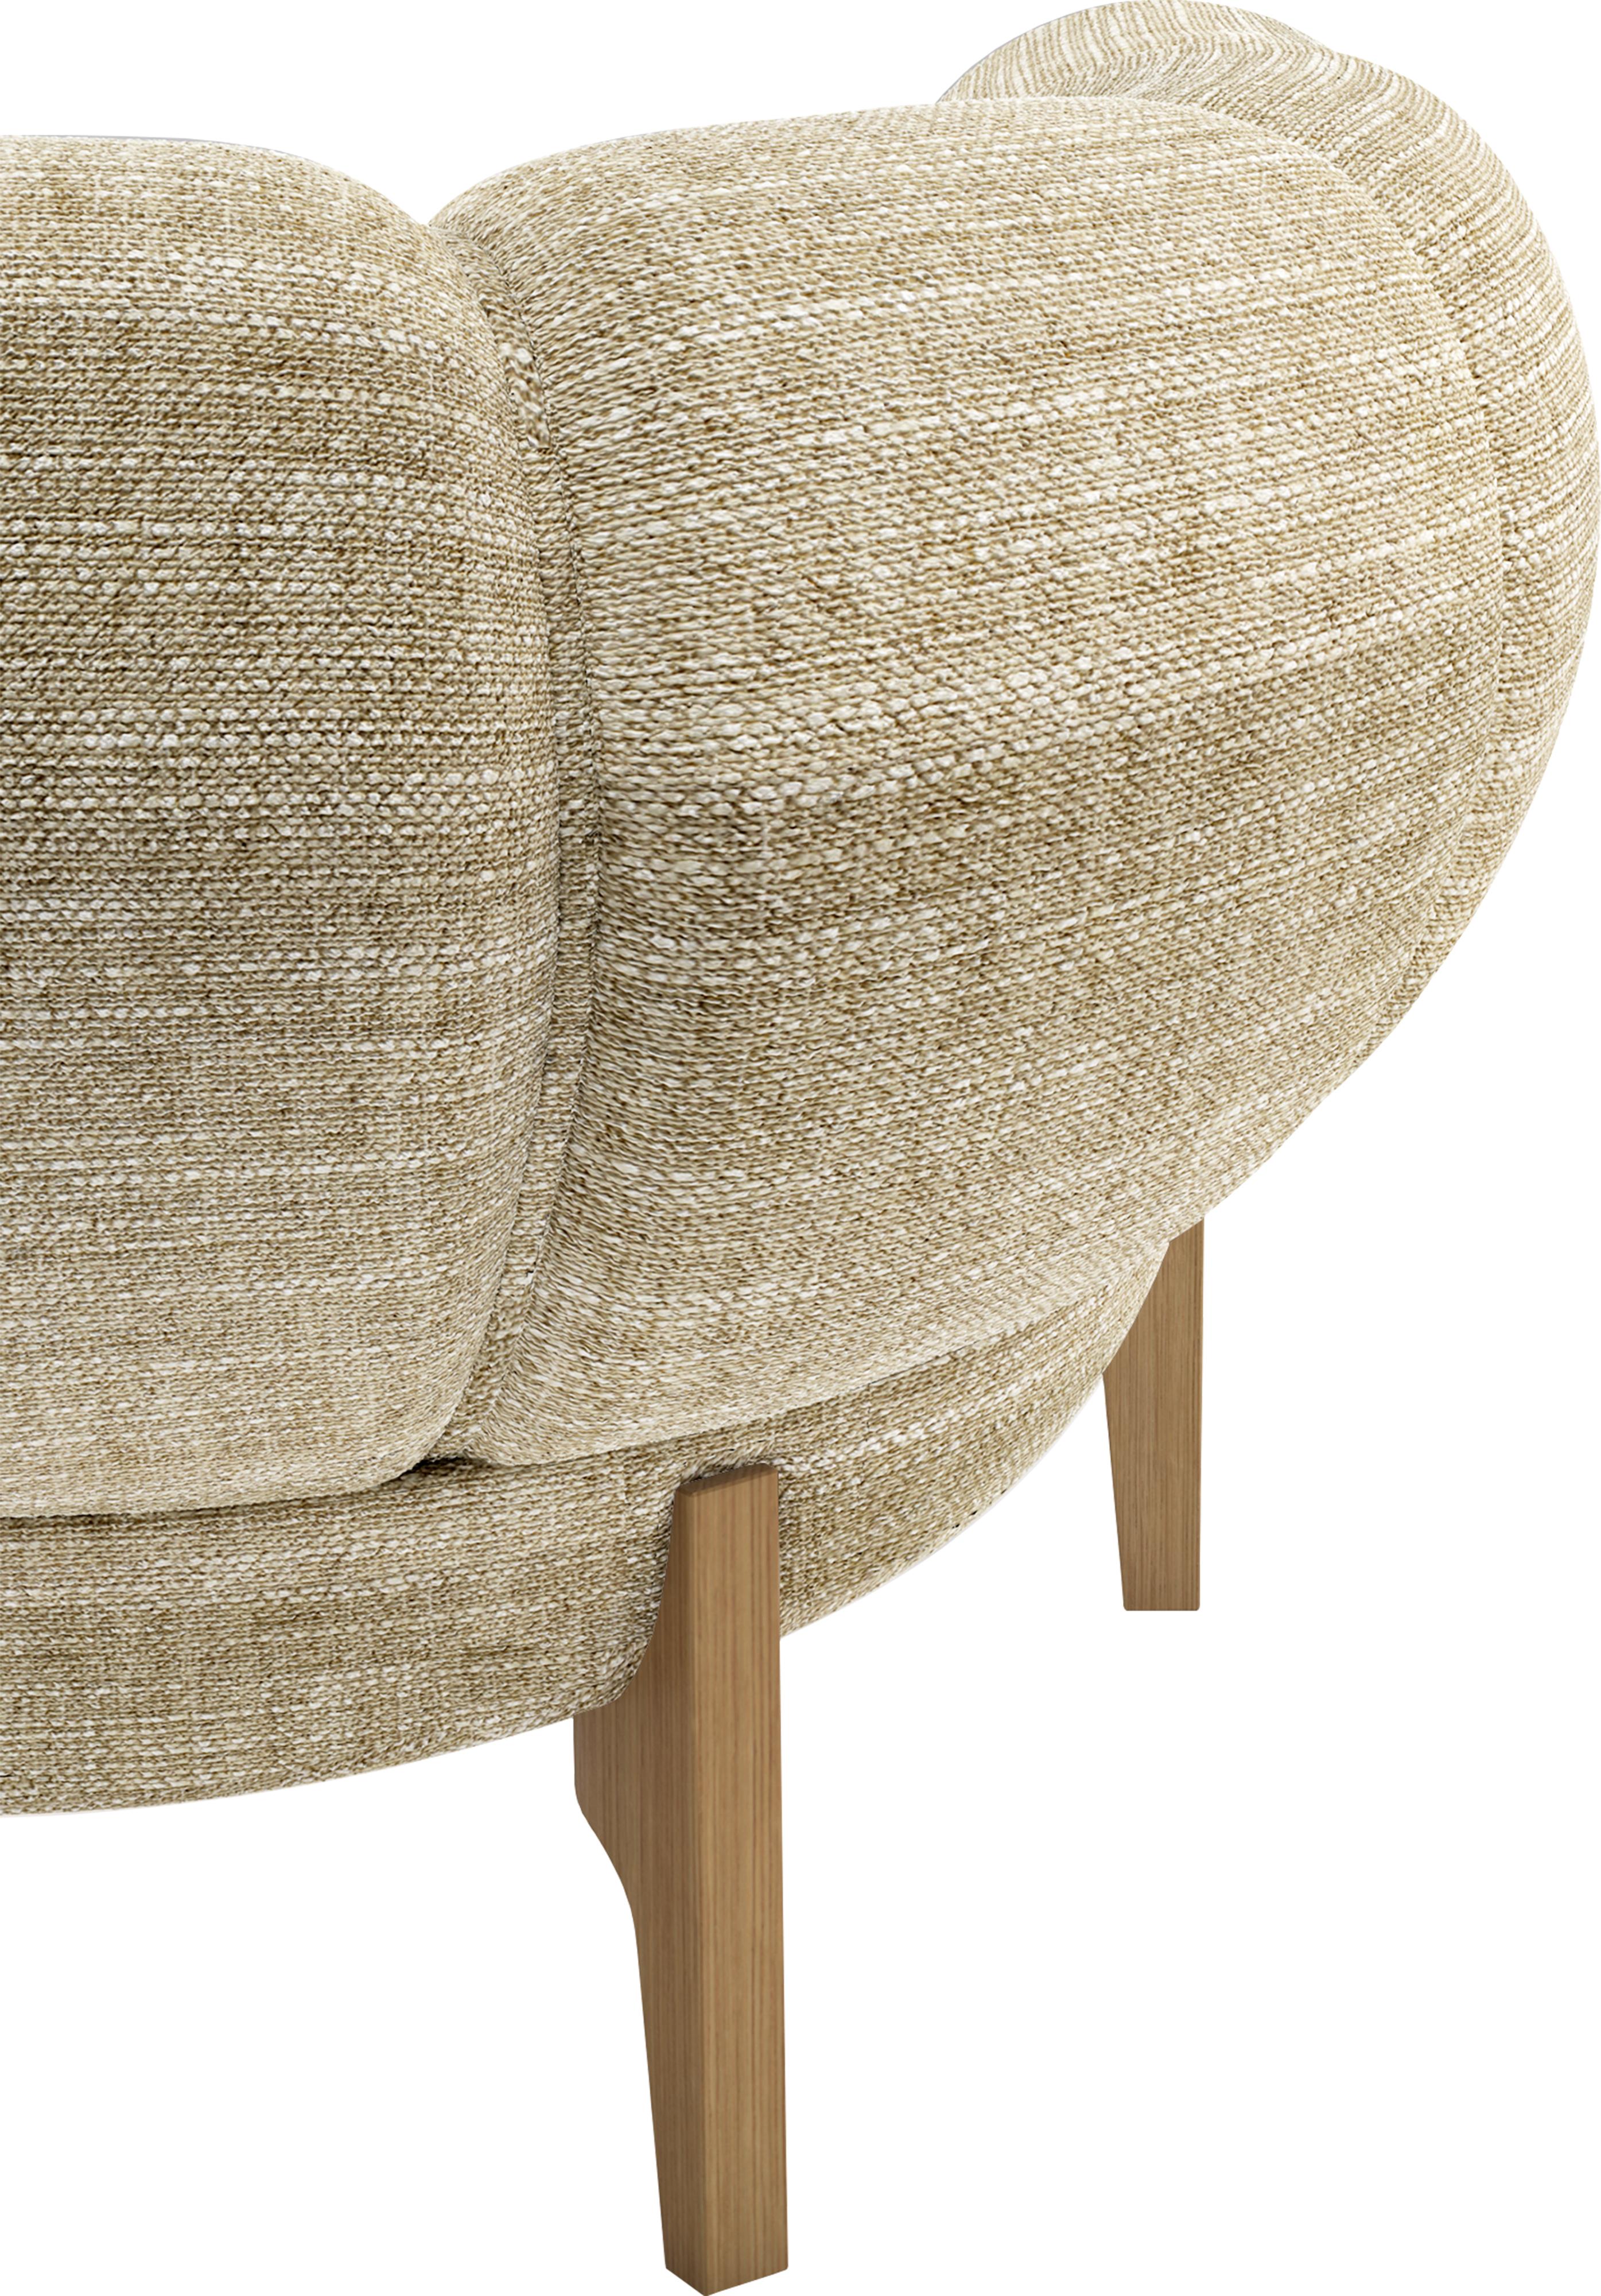 Fabric 'Croissant' Sofa by Illum Wikkelsø for GUBI with Walnut Legs For Sale 5